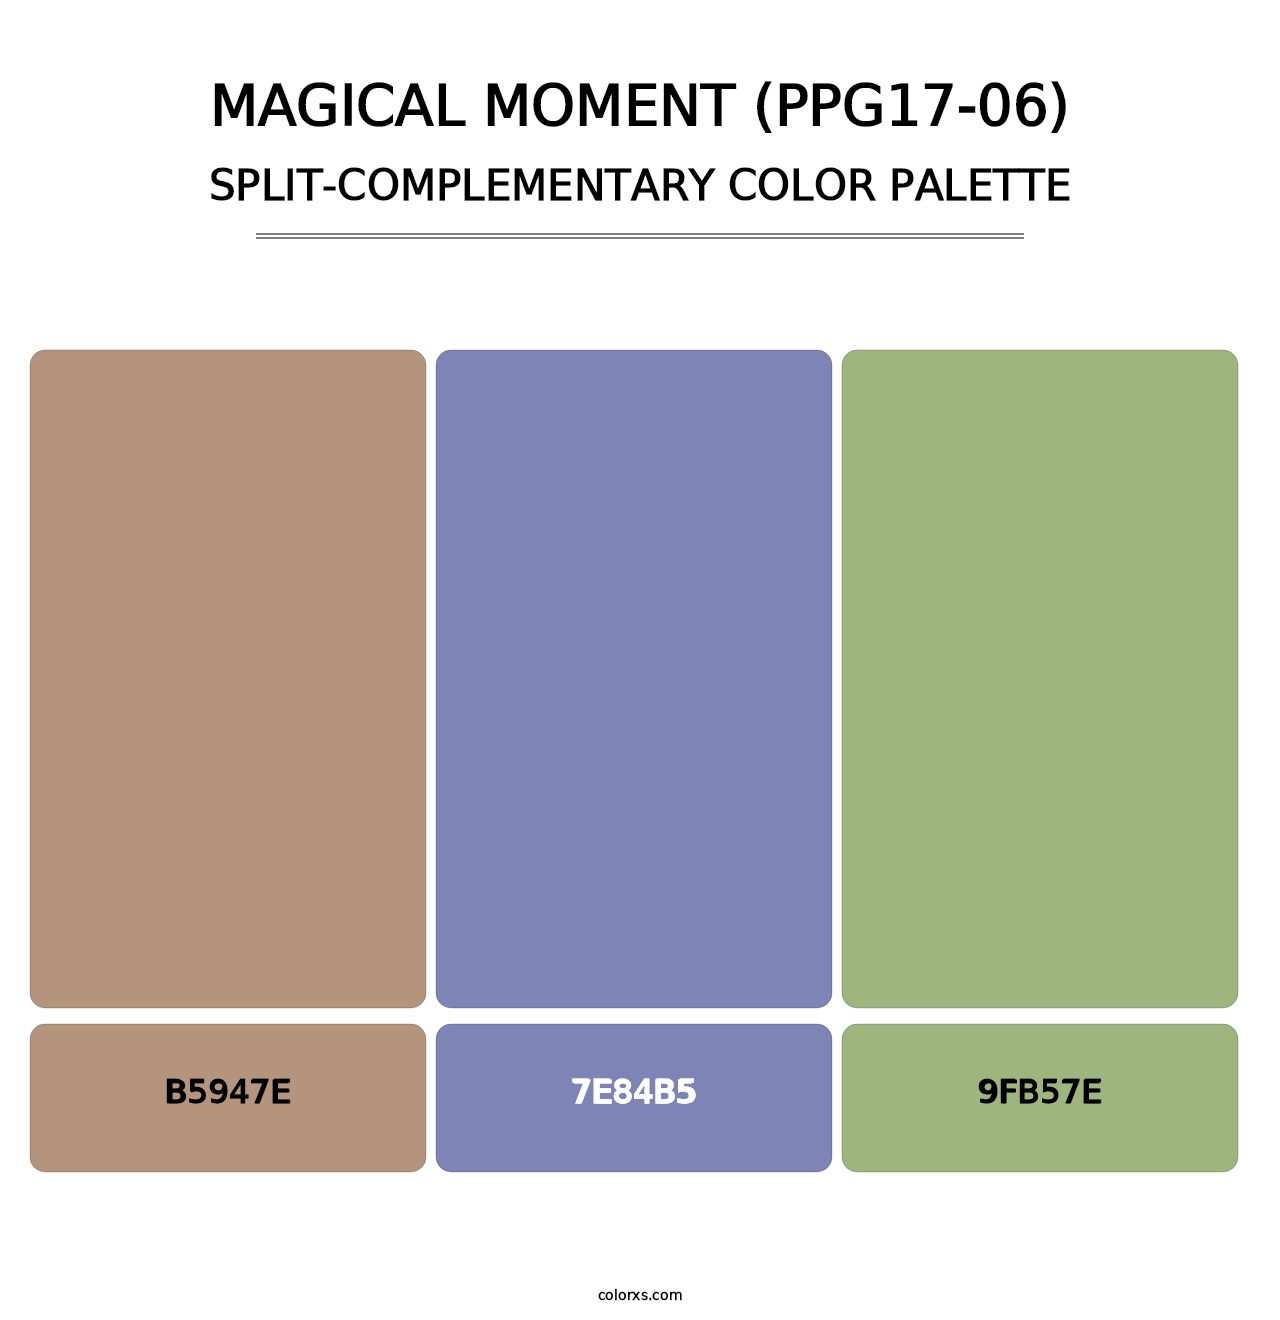 Magical Moment (PPG17-06) - Split-Complementary Color Palette